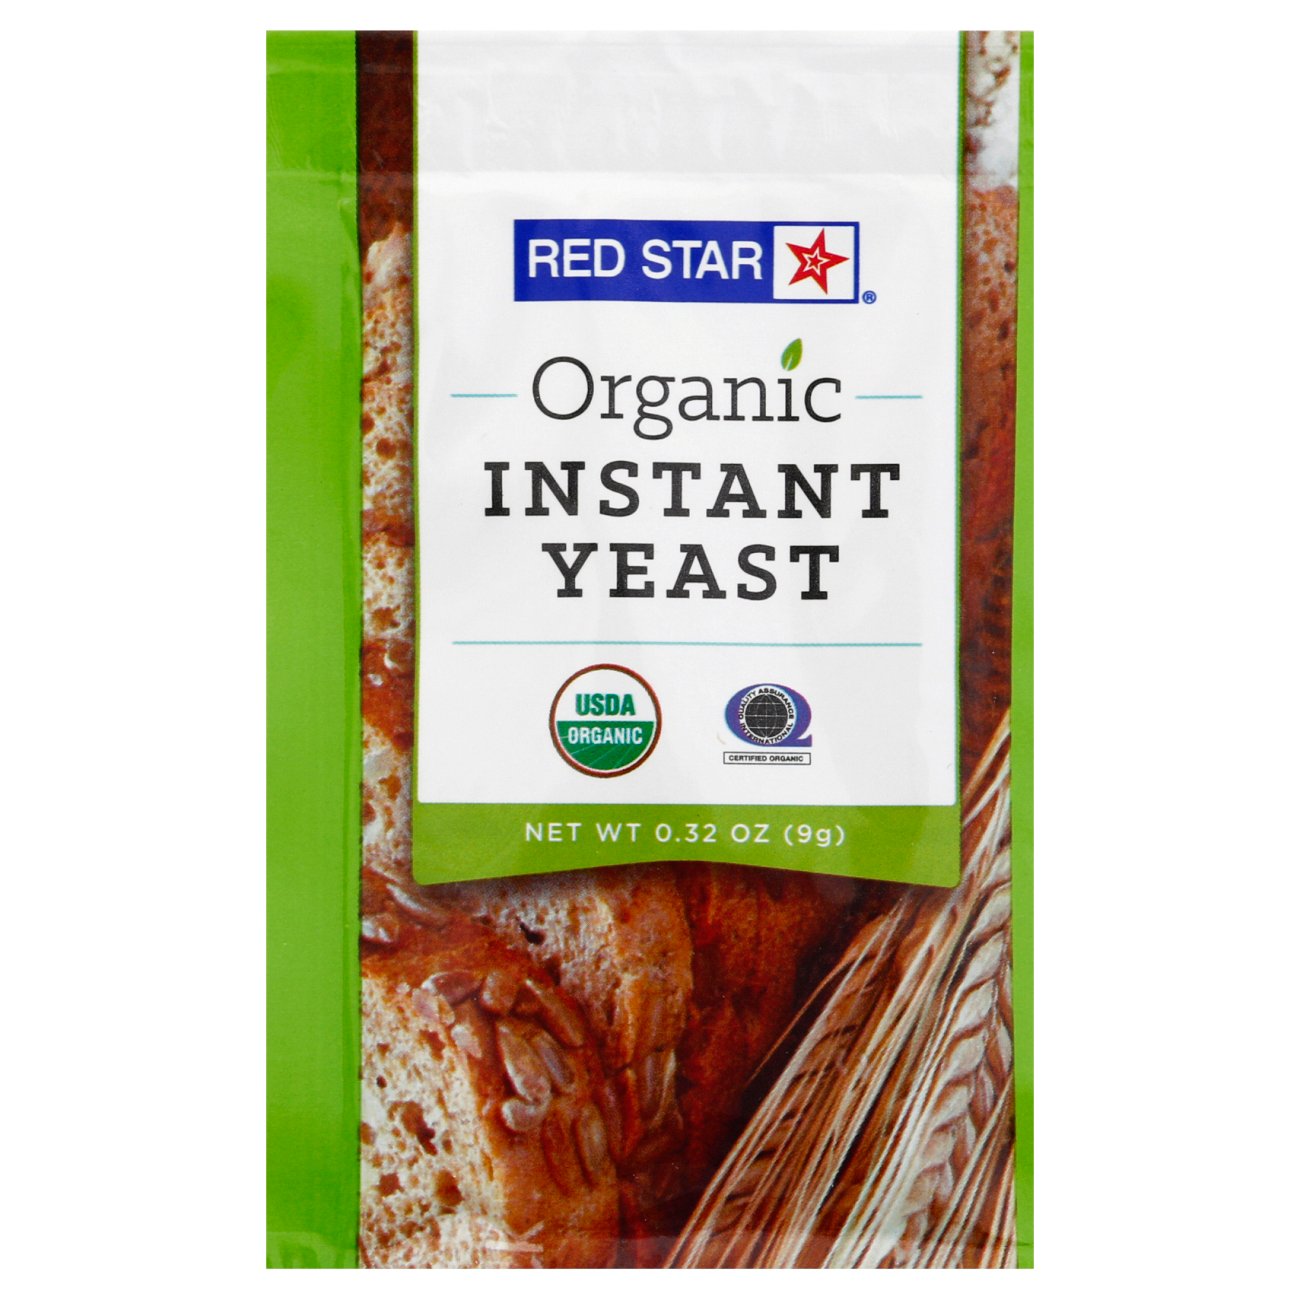 Red Star Organic Instant Yeast Shop Yeast At H E B